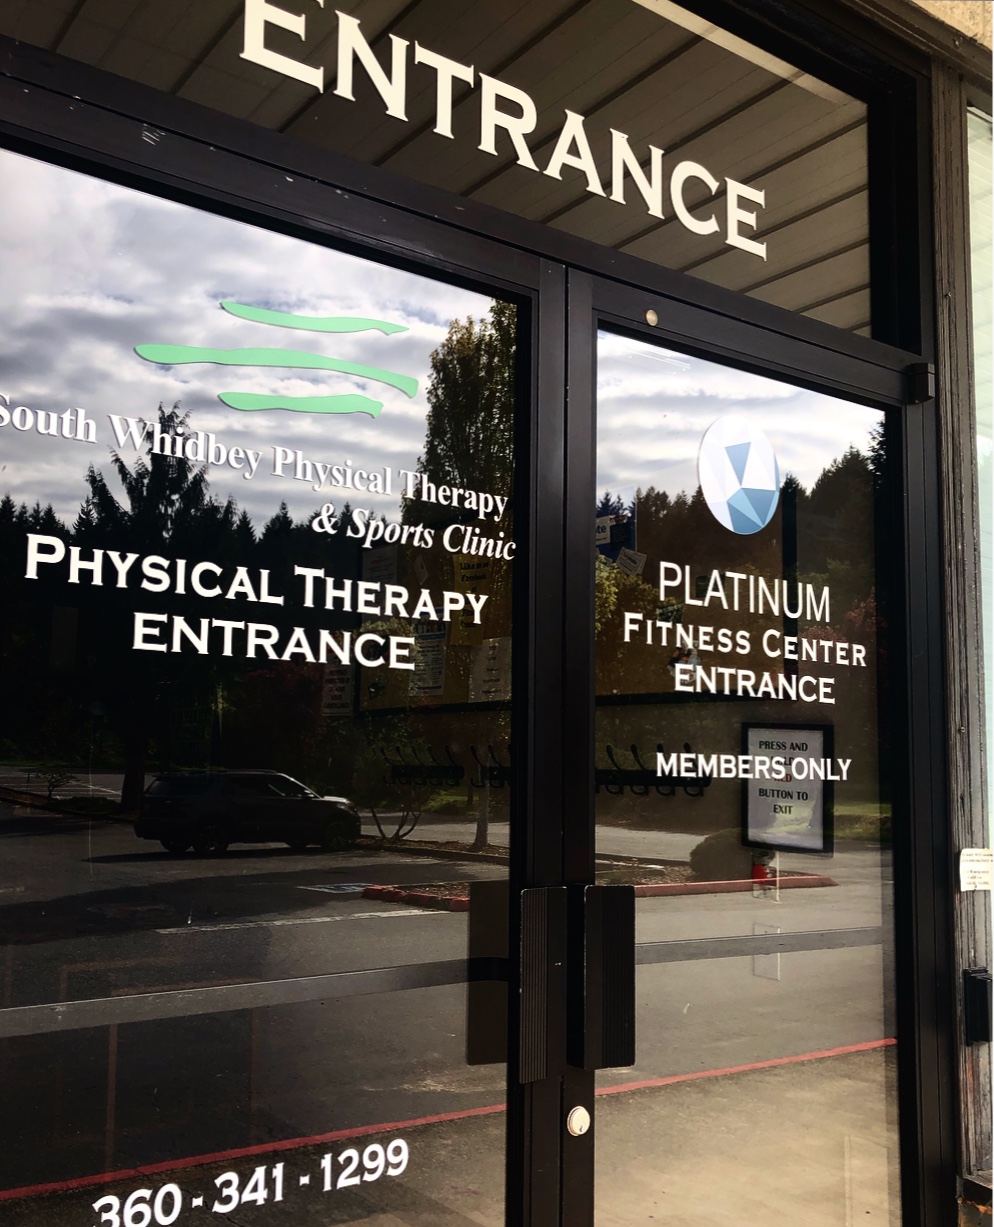 South Whidbey Physical Therapy & Sports Clinic | 11042 WA-525 #134, Clinton, WA 98236 | Phone: (360) 341-1299